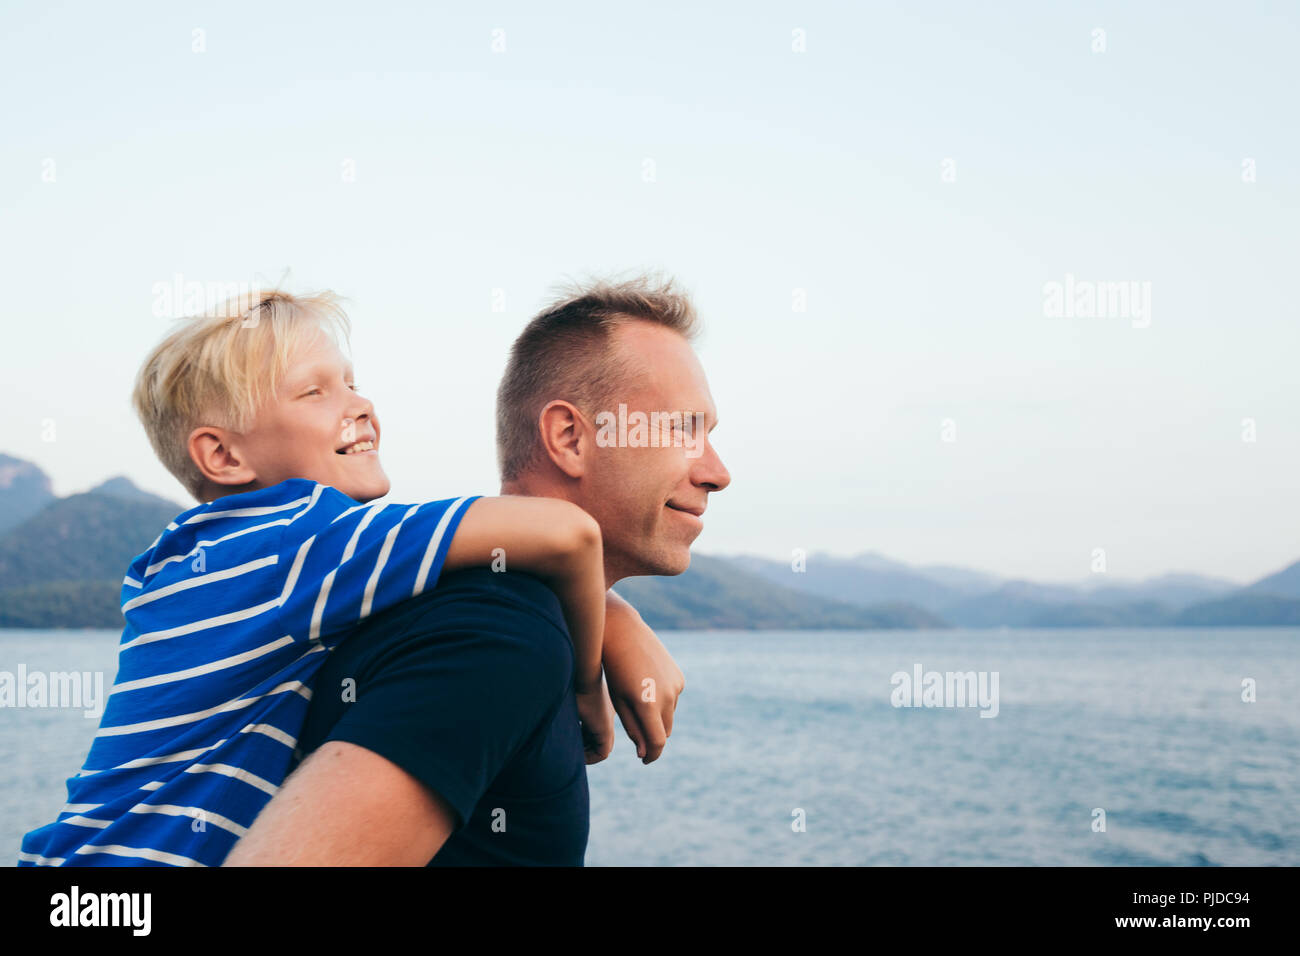 Father and son together. Son hugging father. Summer vacation. Selective focus. Stock Photo